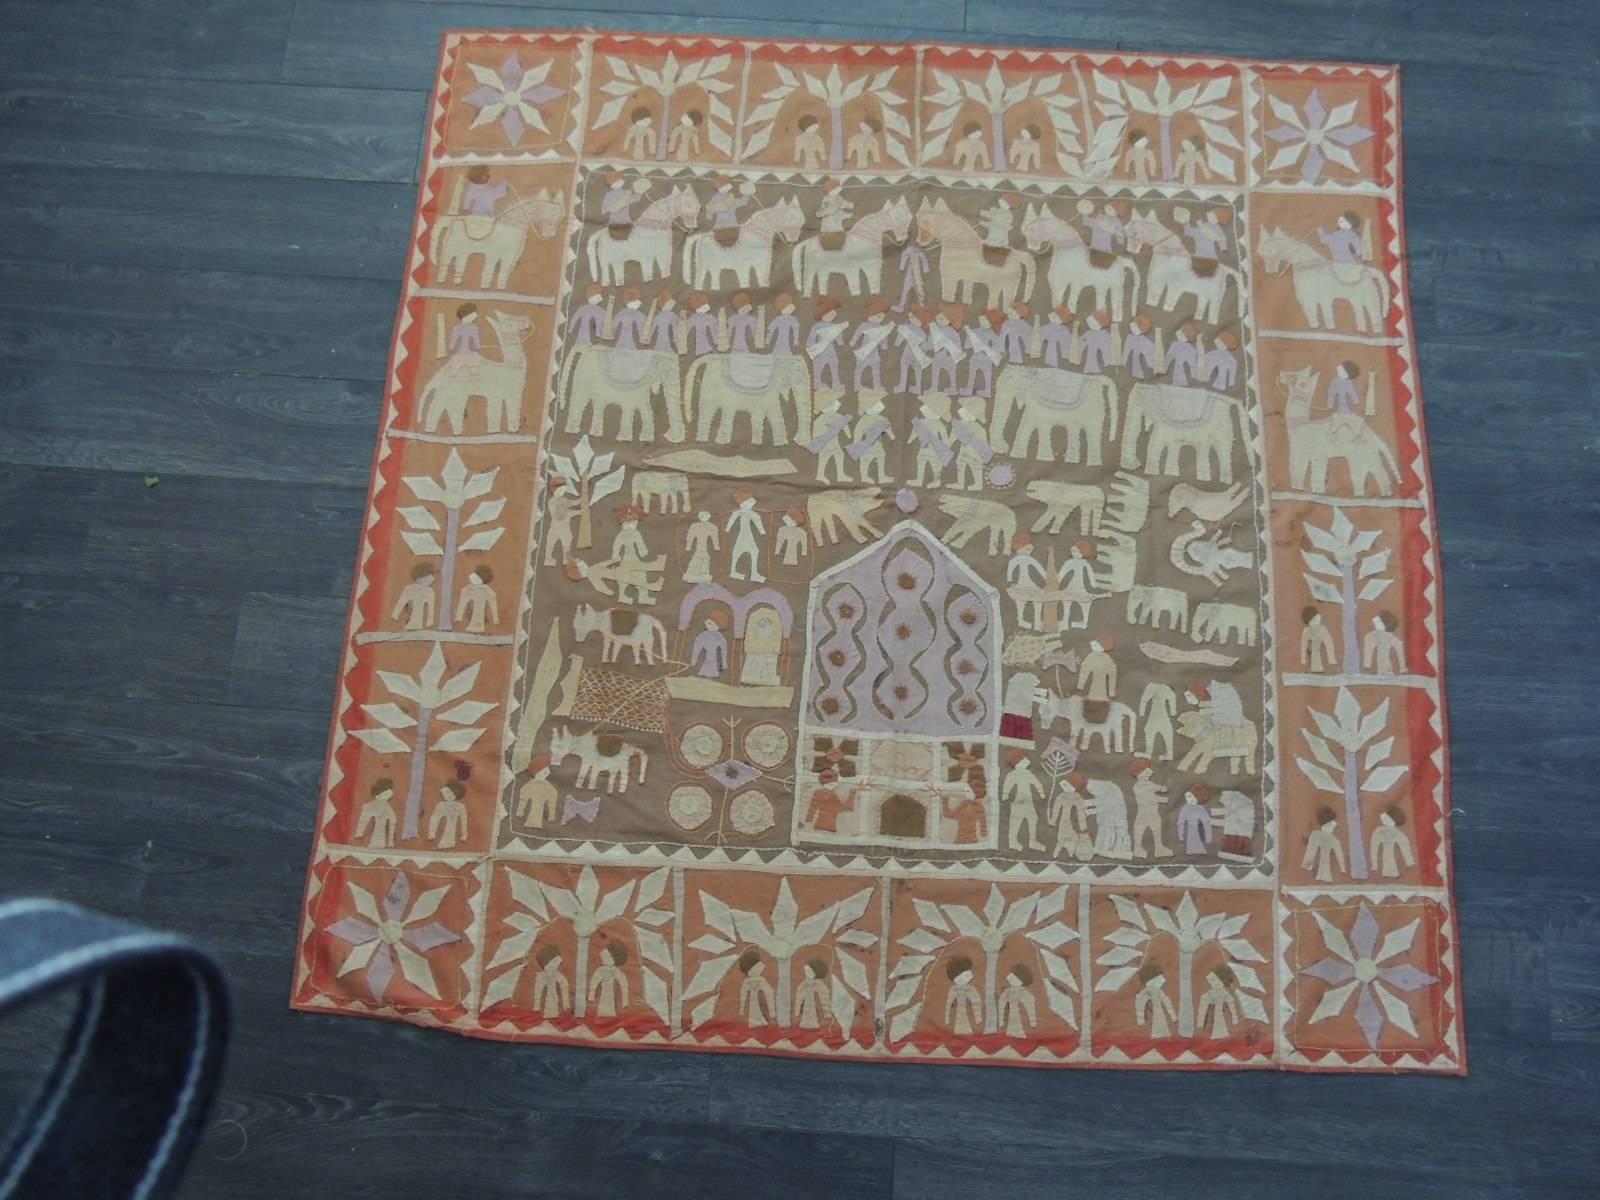 Offered by the Antique Textiles Galleries:
Large vintage Indian appliqué Kanduri shrine cloth  textile depicting palm trees, people, flowers, camels, elephants, a temple, birds, jaguars, donkeys and tigers on light earth tones and in multiple